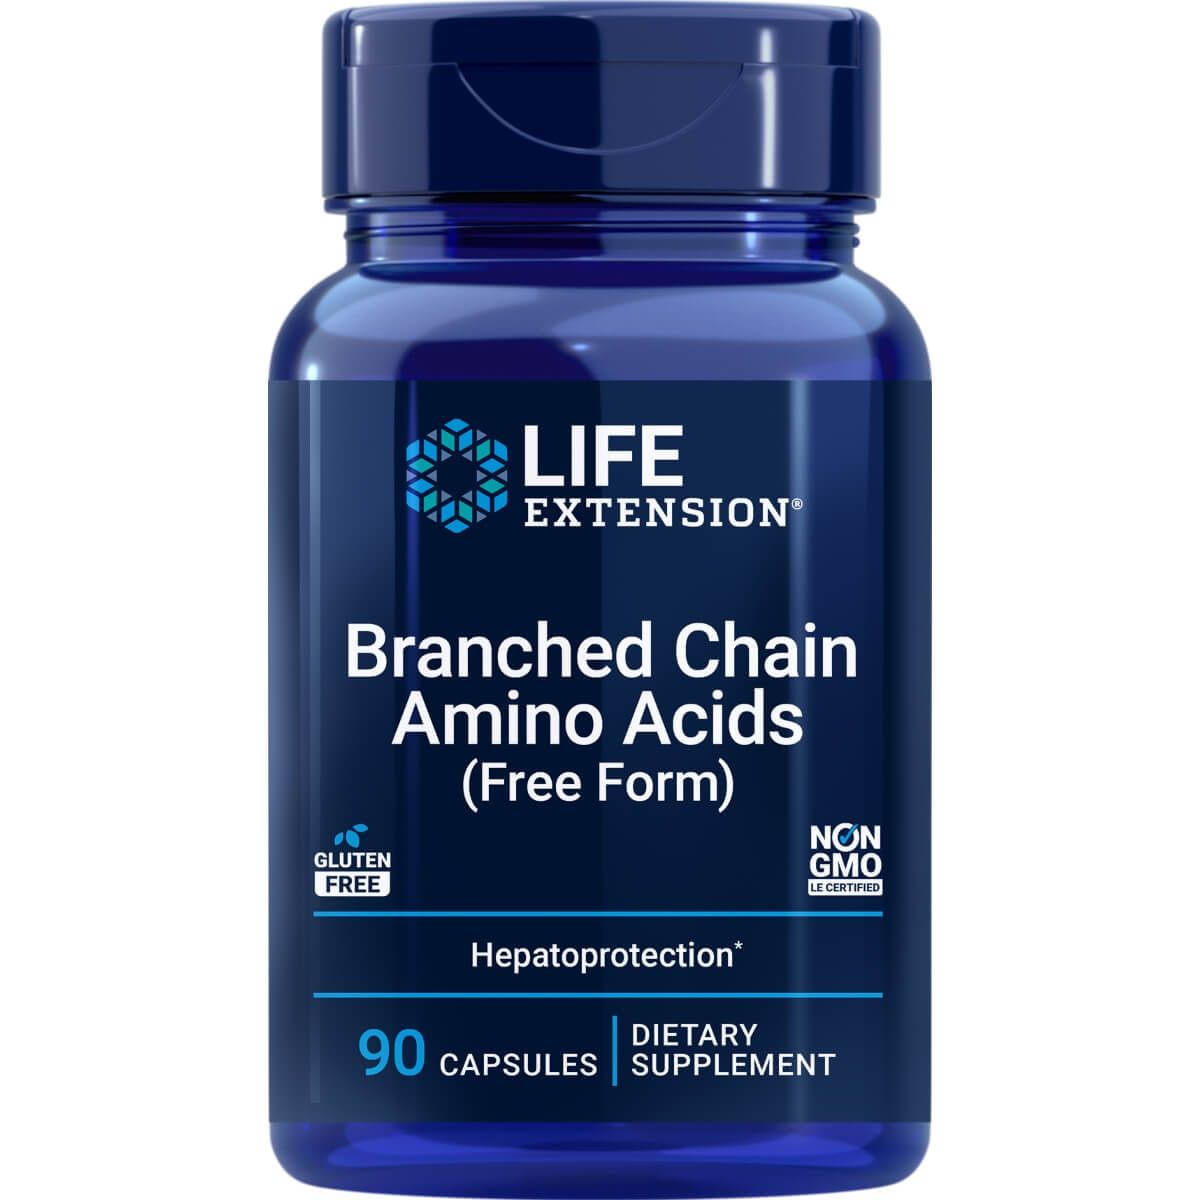 Life Extension Branched Chain Amino Acids 90 Capsules | Premium Supplements at MYSUPPLEMENTSHOP